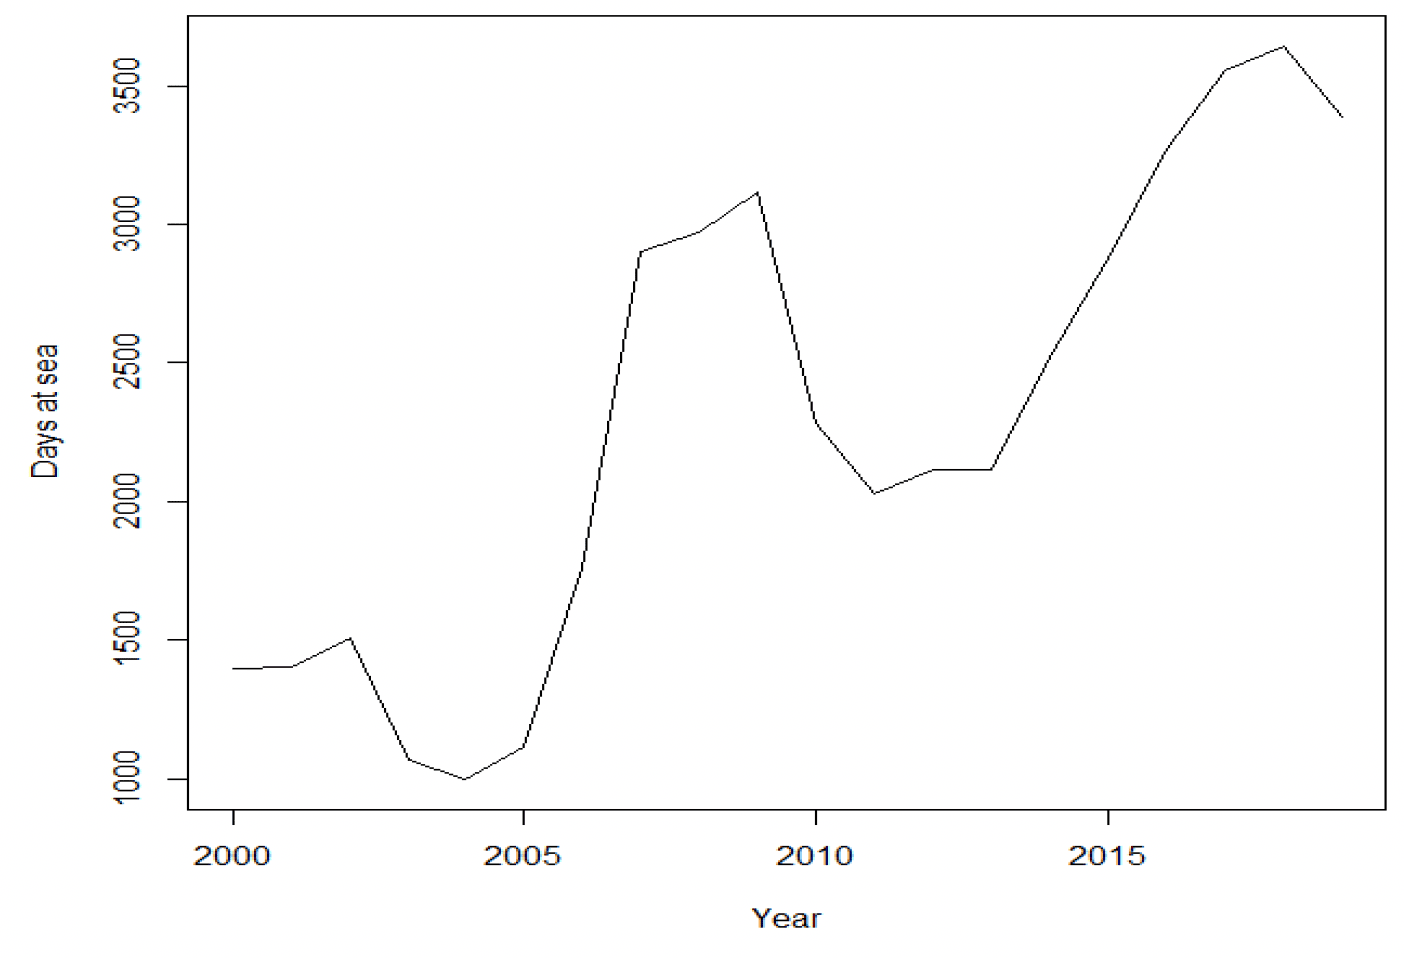 Trendline in the amount of fishing effort (days at sea) for UK registered longliners increases to over 3000 in 2009, then dips back to around 2000 days in 2011 to 2013, before increasing again to over 3500 in 2018.